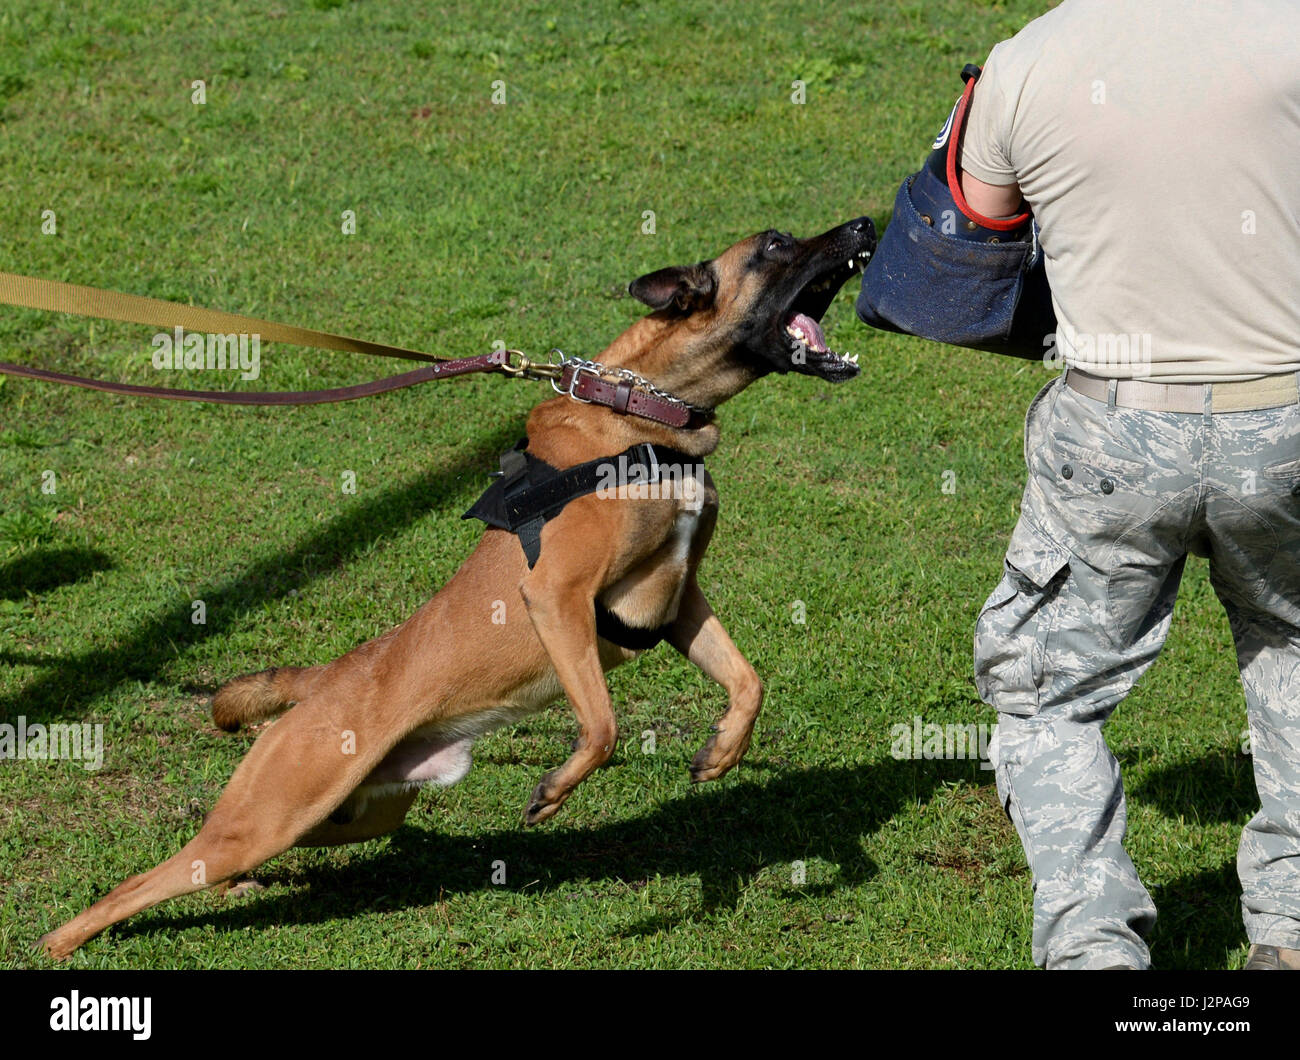 U.S. Air Force military working dog Chicco, performs a controlled bite March 14, 2017, at Andersen Air Force Base, Guam. Teams trained in a controlled environment to teach the MWDs and handlers how to respond to real world situations. (U.S. Air Force photo by Airman 1st Class Gerald R. Willis/Released) Stock Photo